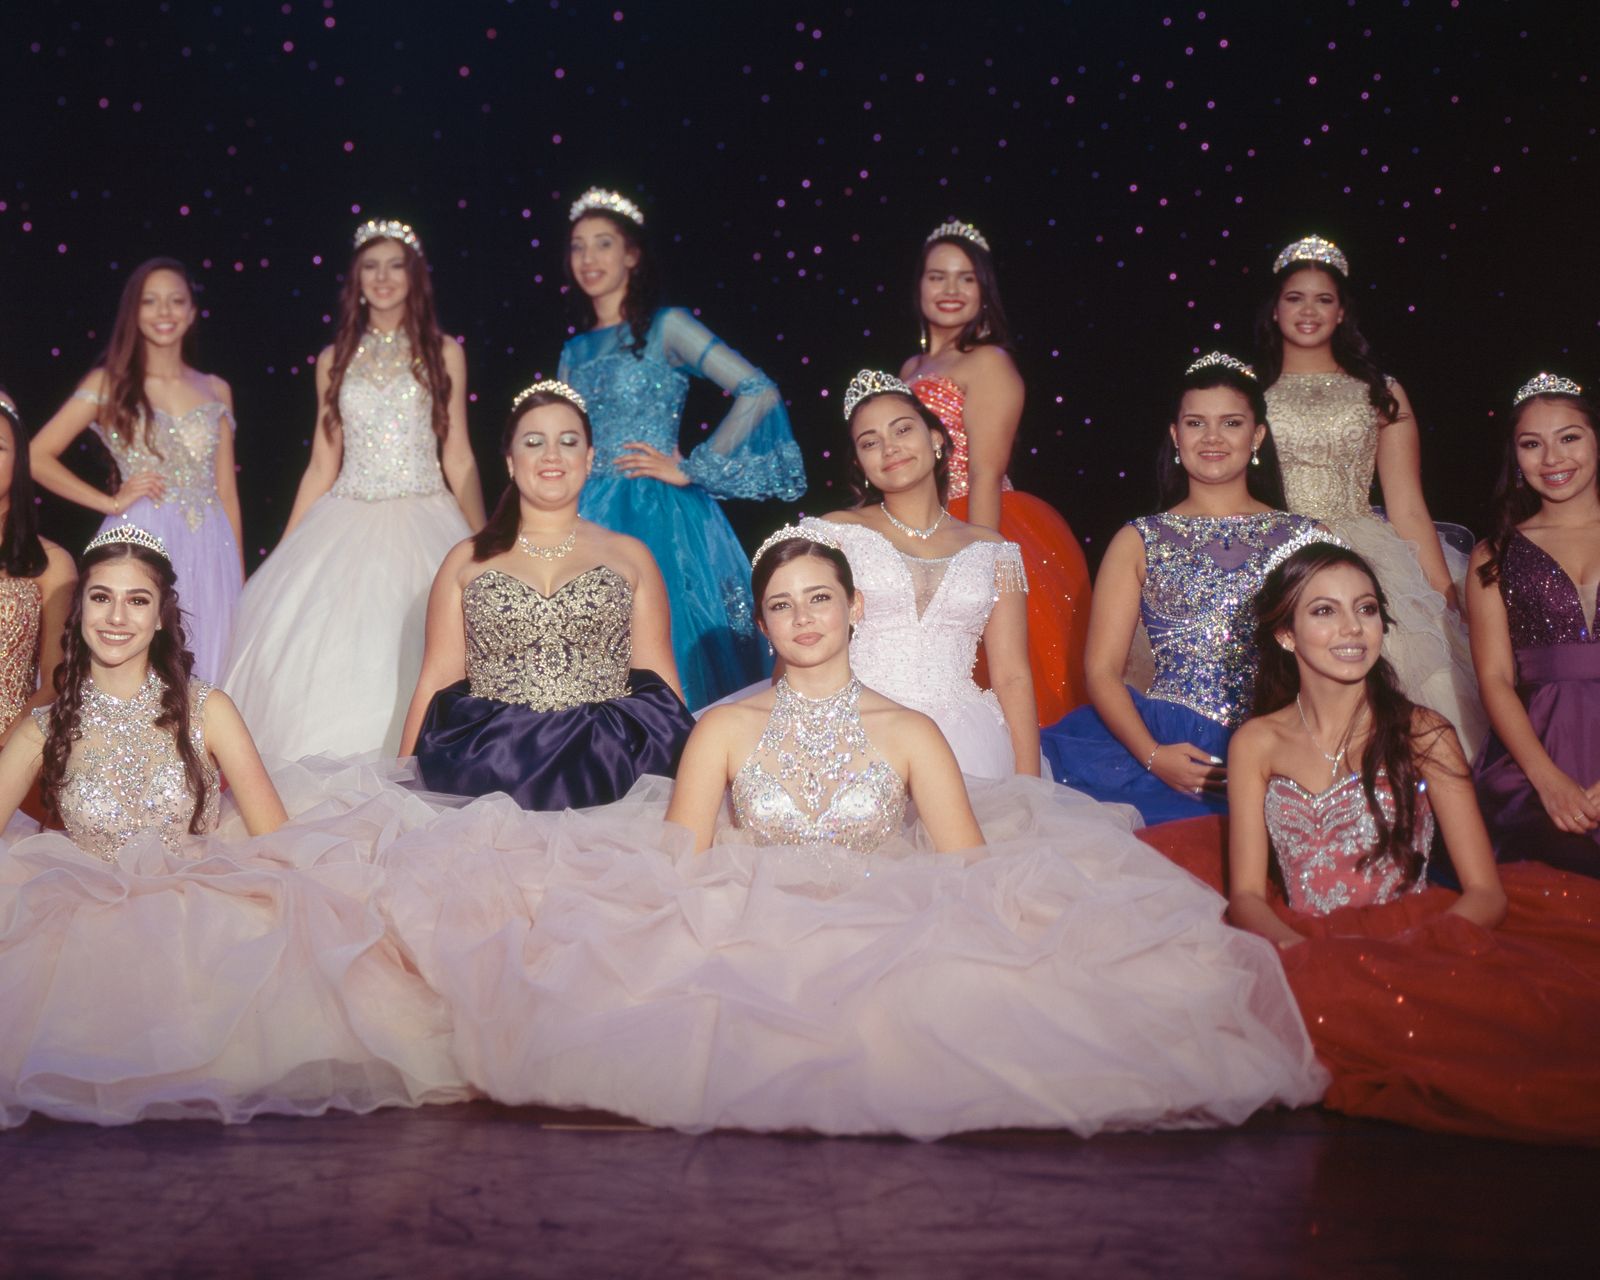 © Samantha Cabrera Friend - Quinceañeras grouped by untraditional dress color, smile for a final group portrait amid the performance